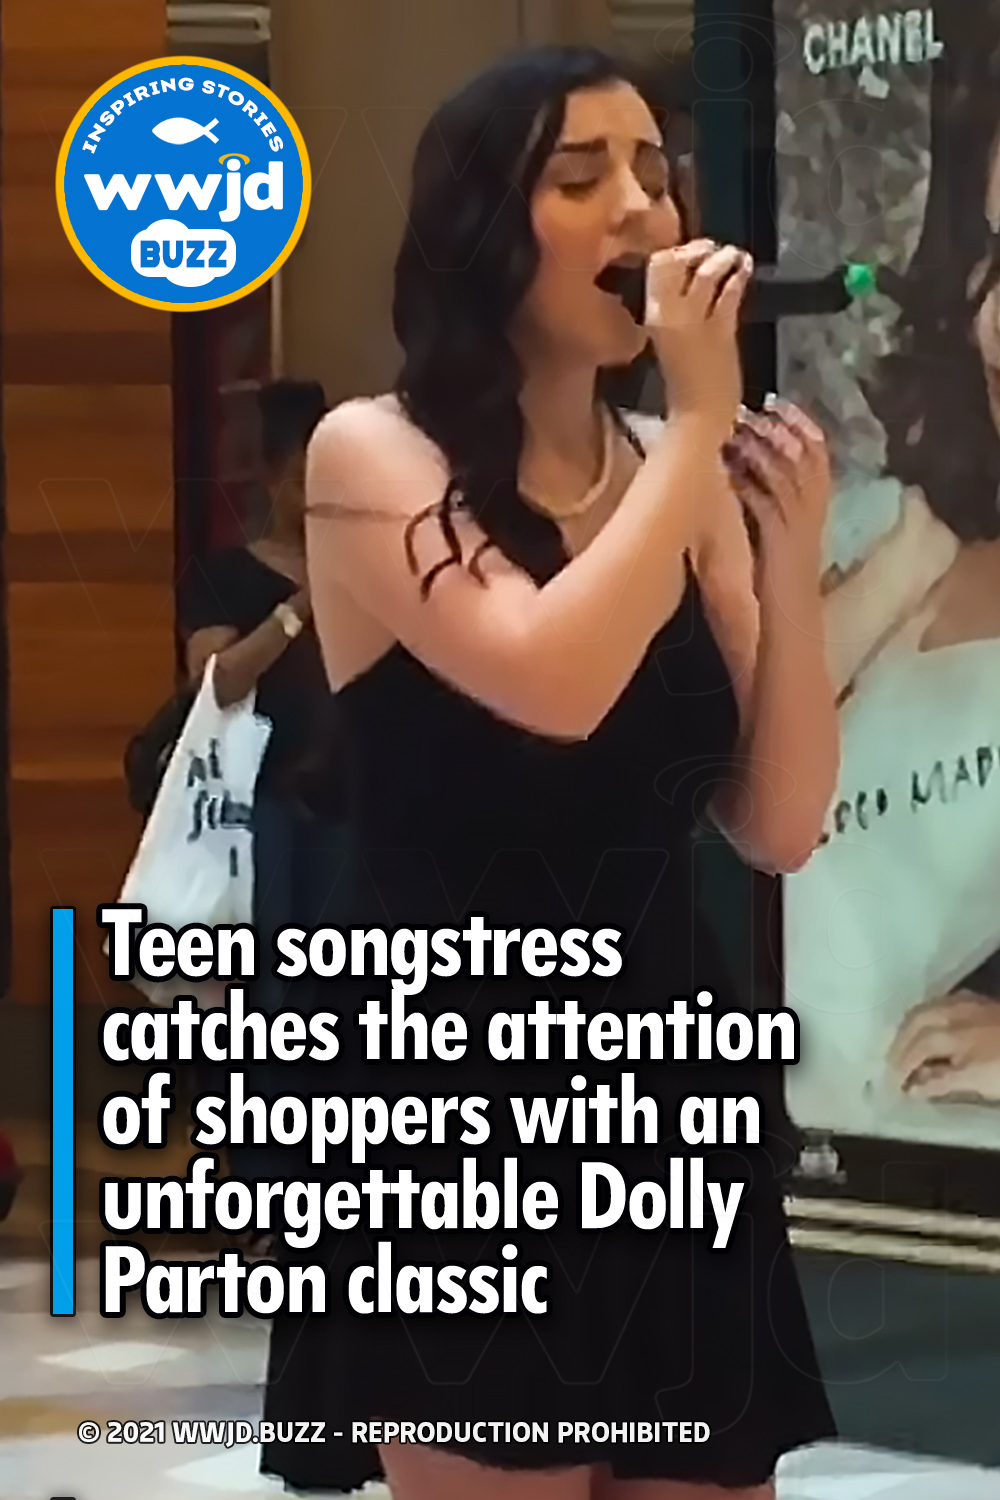 Teen songstress catches the attention of shoppers with an unforgettable Dolly Parton classic